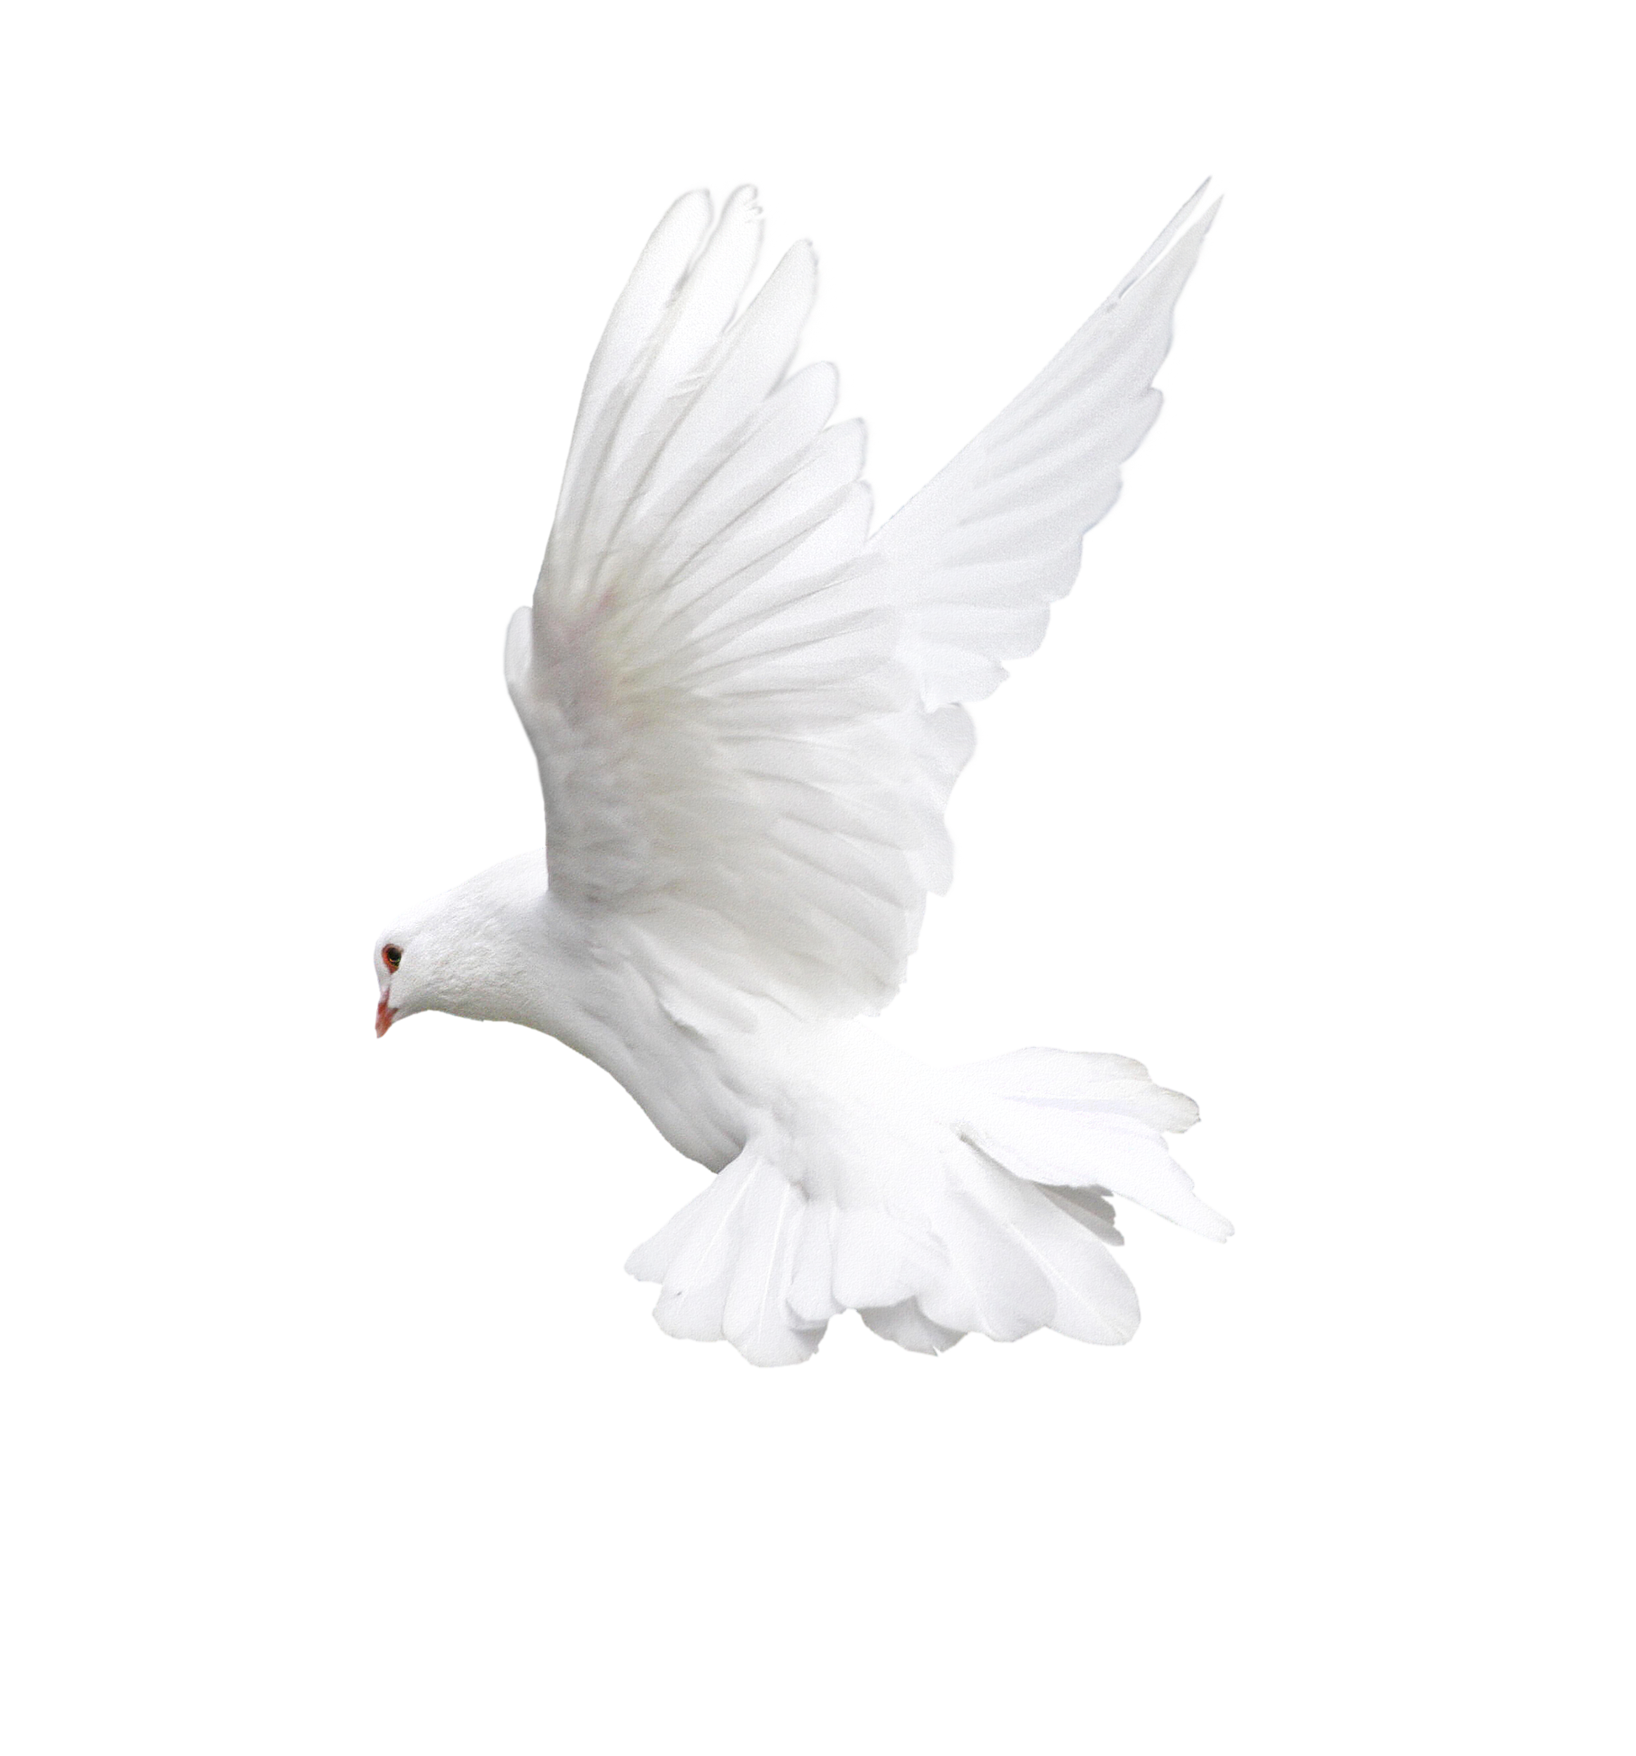 White Peace Pigeon Download Free Image PNG Image